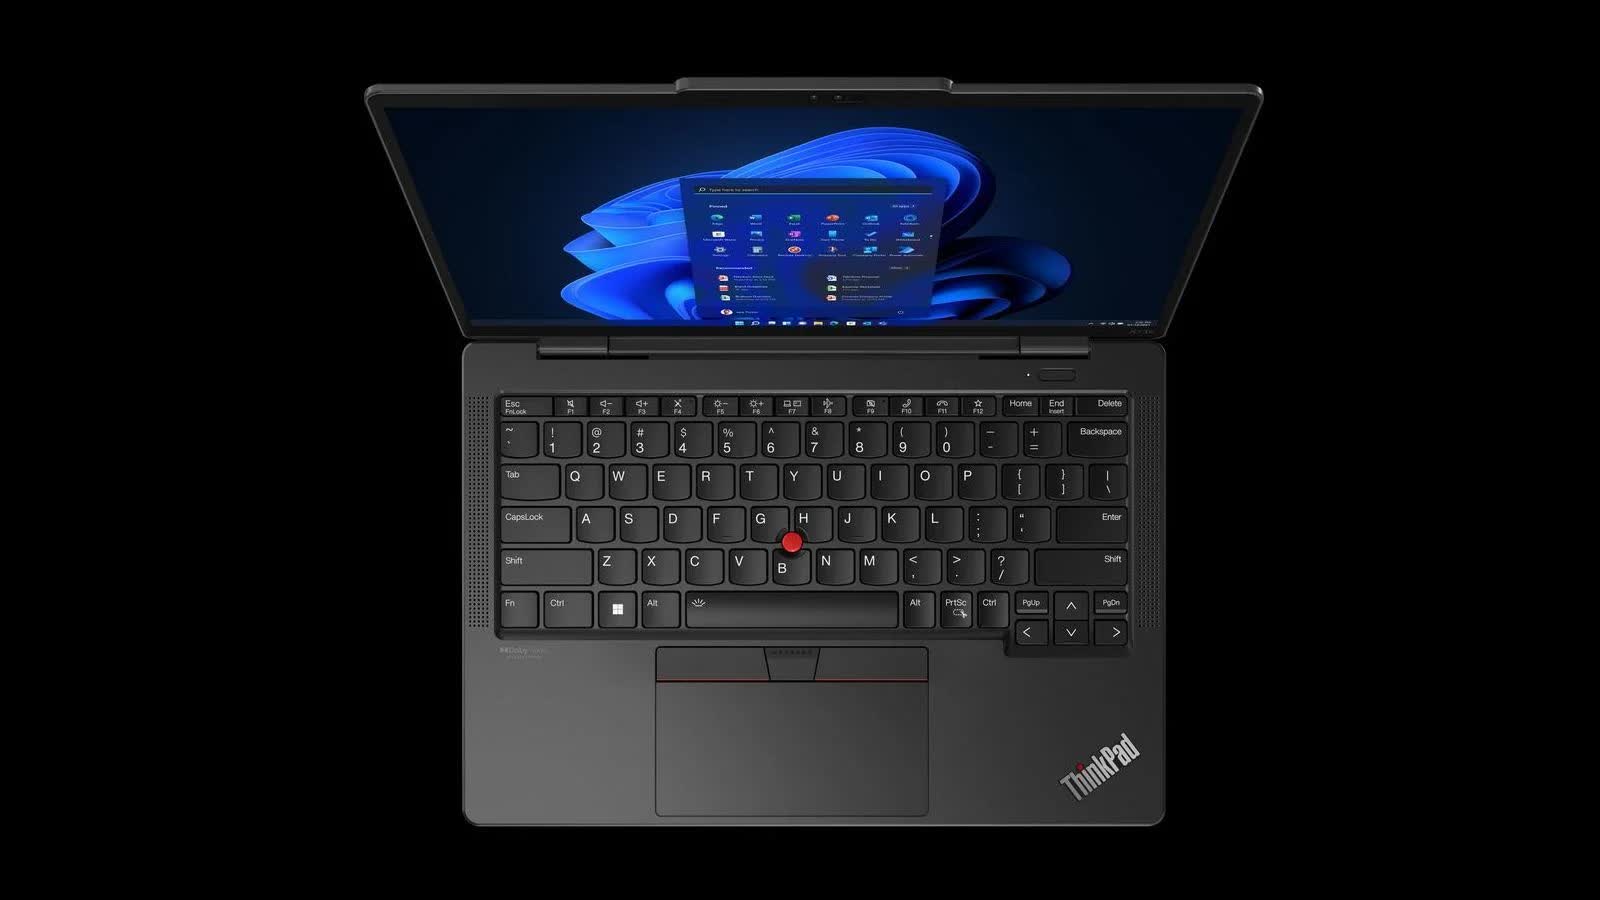 Lenovo unveils the Snapdragon-powered ThinkPad X13s, claims 28-hour battery life